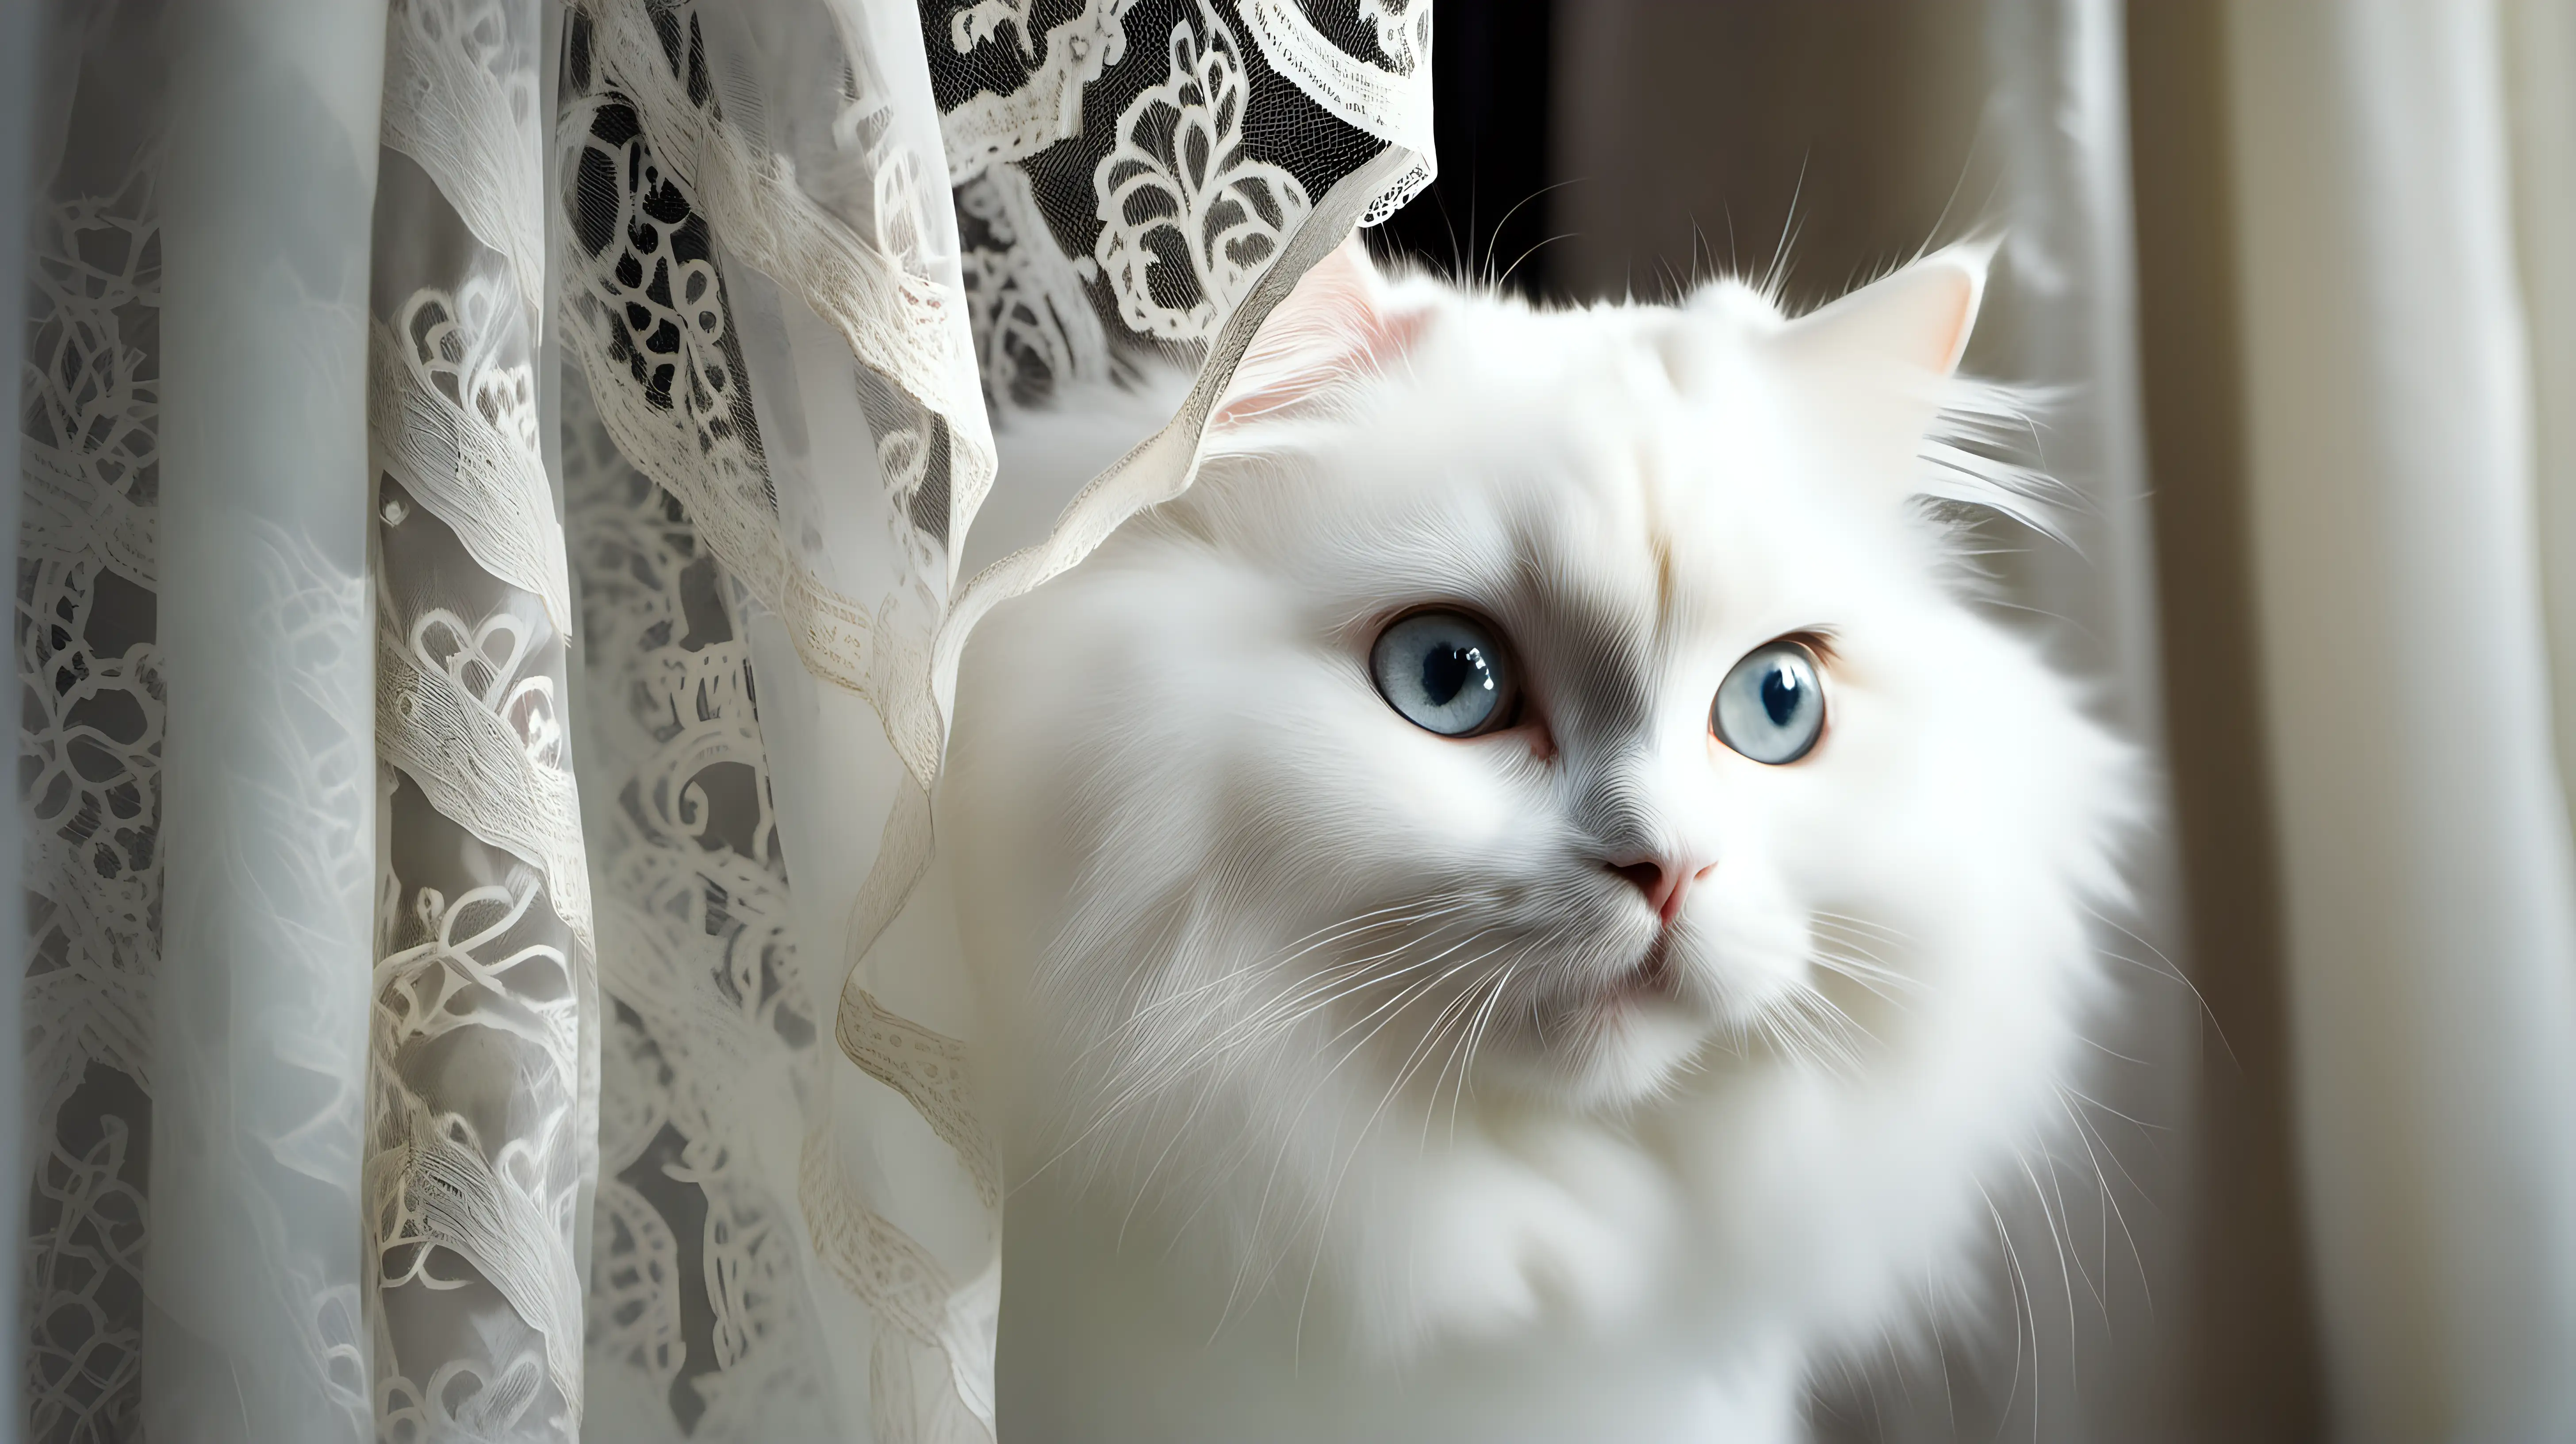 A fluffy white cat peering out from underneath a lace curtain, its large eyes sparkling with innocence.